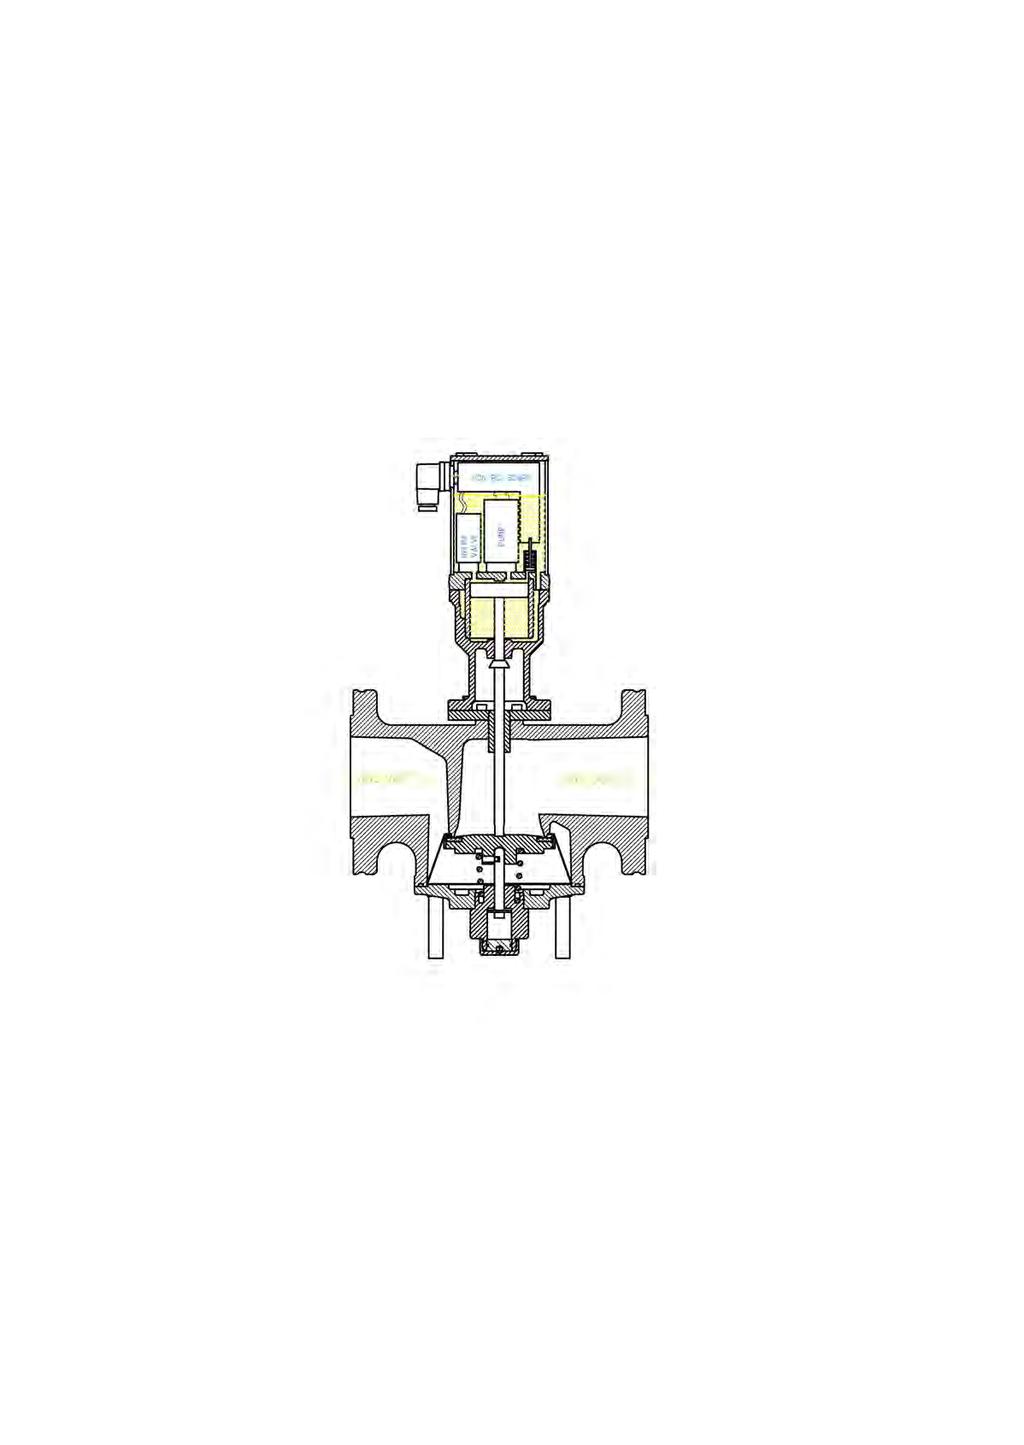 Functioning and application The VMH type valve is a safety shutting device using auxiliary power supply. When it is de-energized, the spring pushes on the seal disc, keeping the gas passage closed.